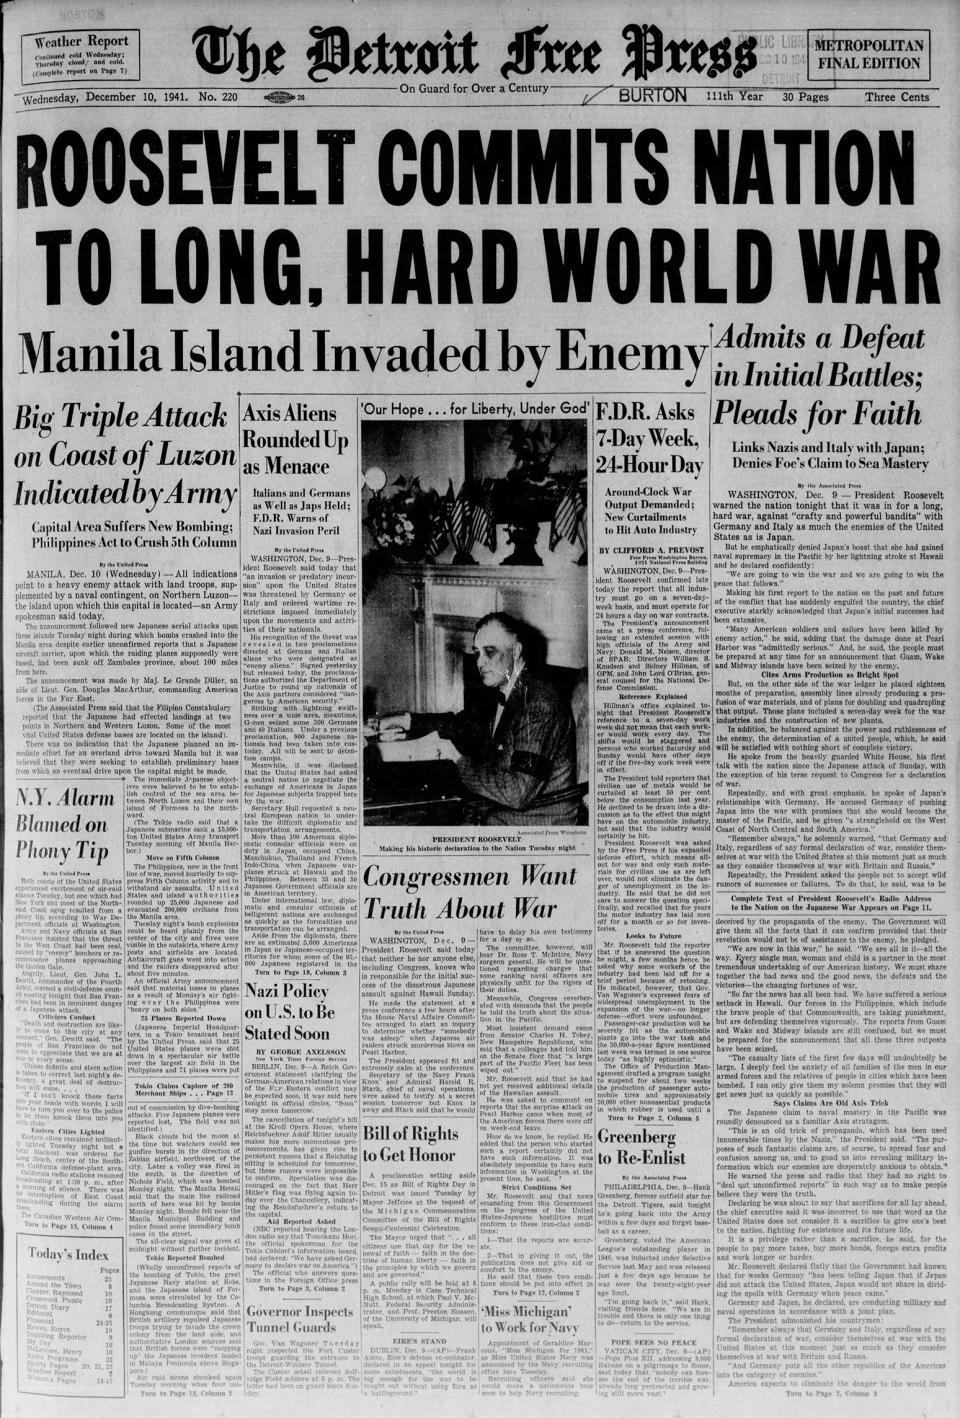 The front page of the Detroit Free Press on Dec. 10, 1941, quotes President Fanklin D. Roosevelt: "We are going to win the war and we are going to win the peace that follows."